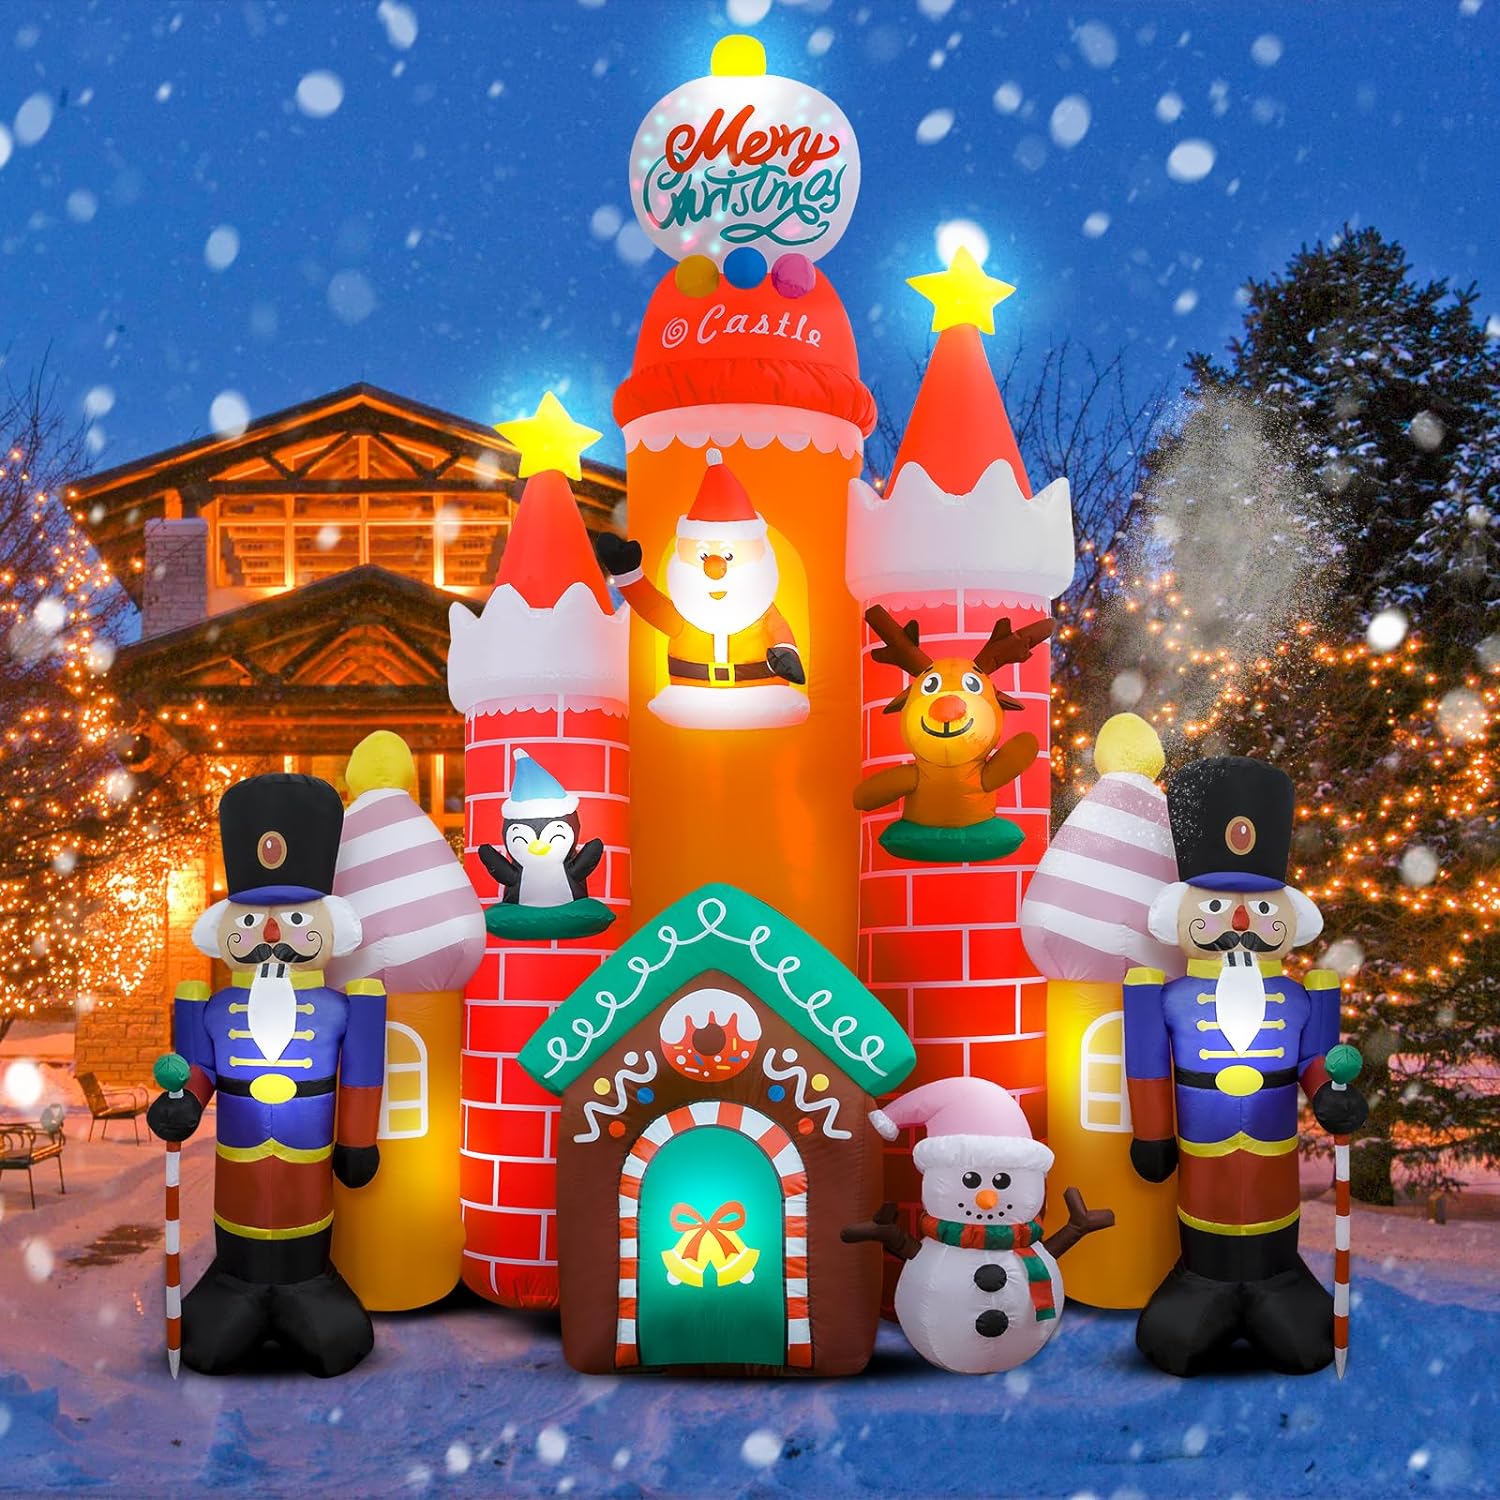 11Ft Christmas Inflatables Candy Castle, Blow Up Giant Christmas Decorations Outdoor with Soldier Santa Reindeer Penguin Colorful Led Lights for Yard Indoor Outdoor Garden Lawn Holiday Party Decor